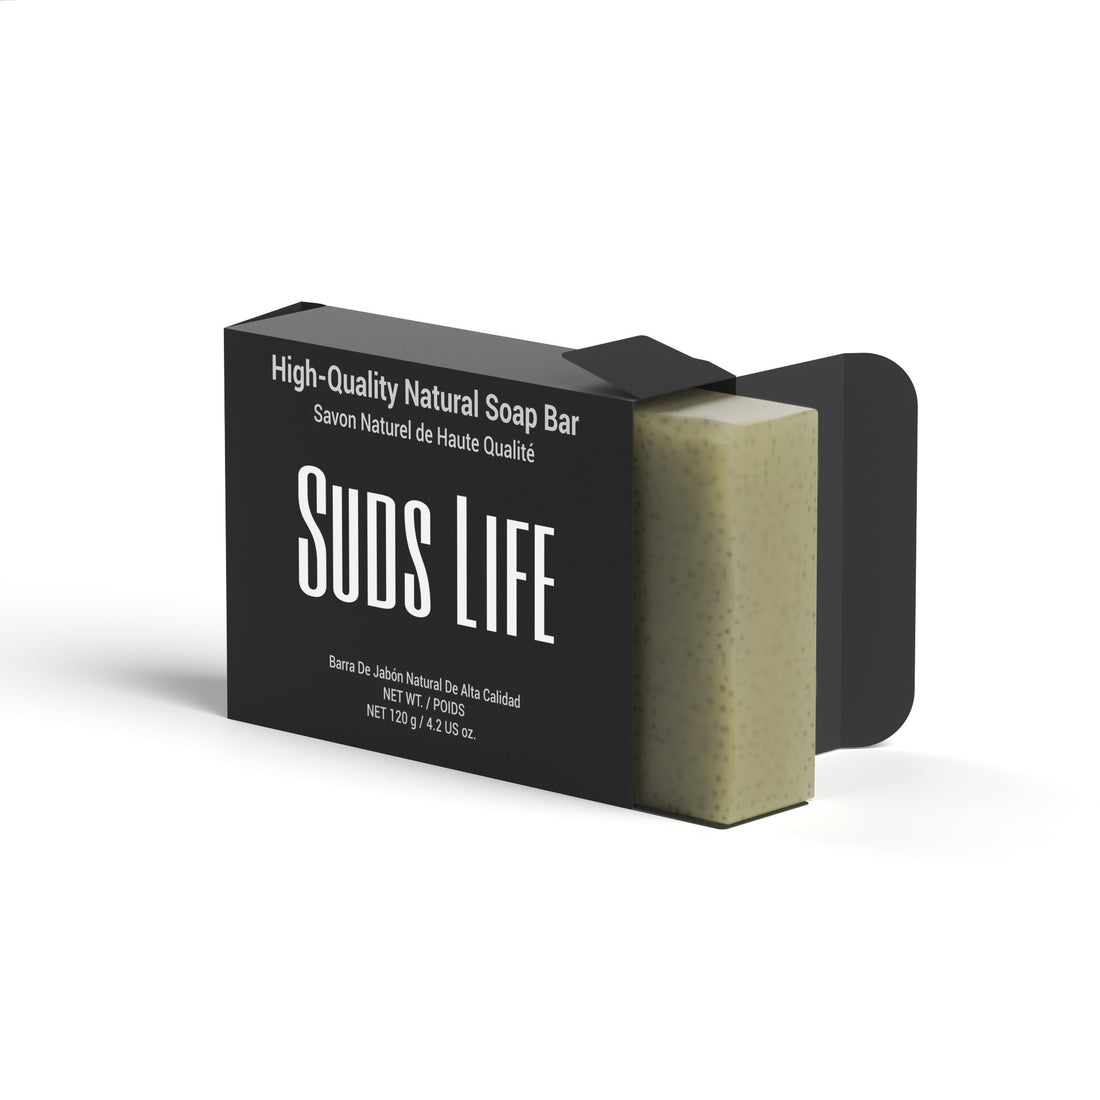 A bar of natural green tea soap from suds life